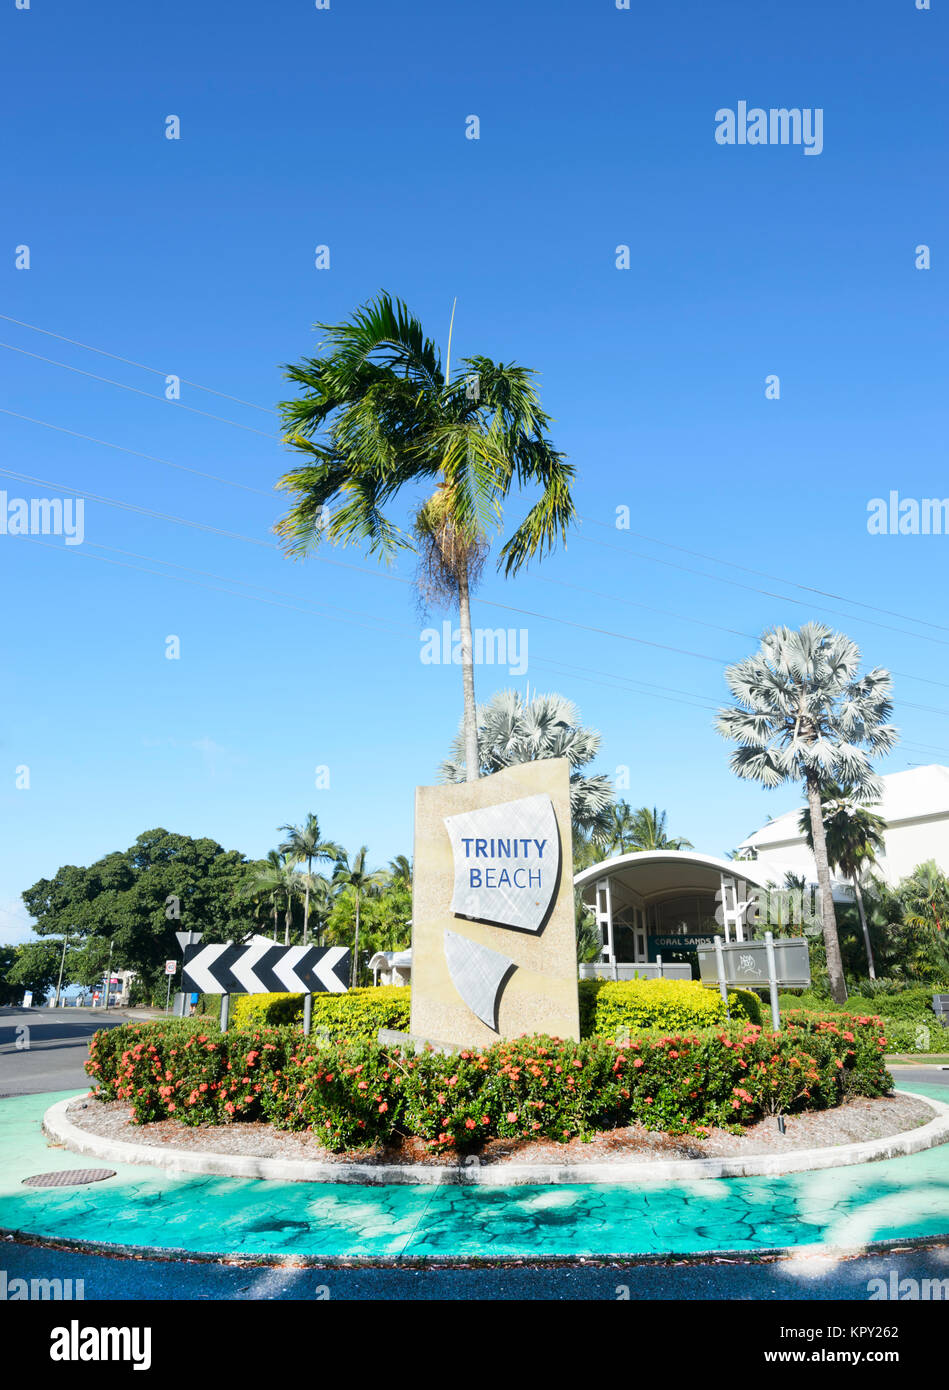 Name sign at Trinity Beach, a popular Northern Beaches suburb of Cairns, Far North Queensland, FNQ, QLD, Australia Stock Photo